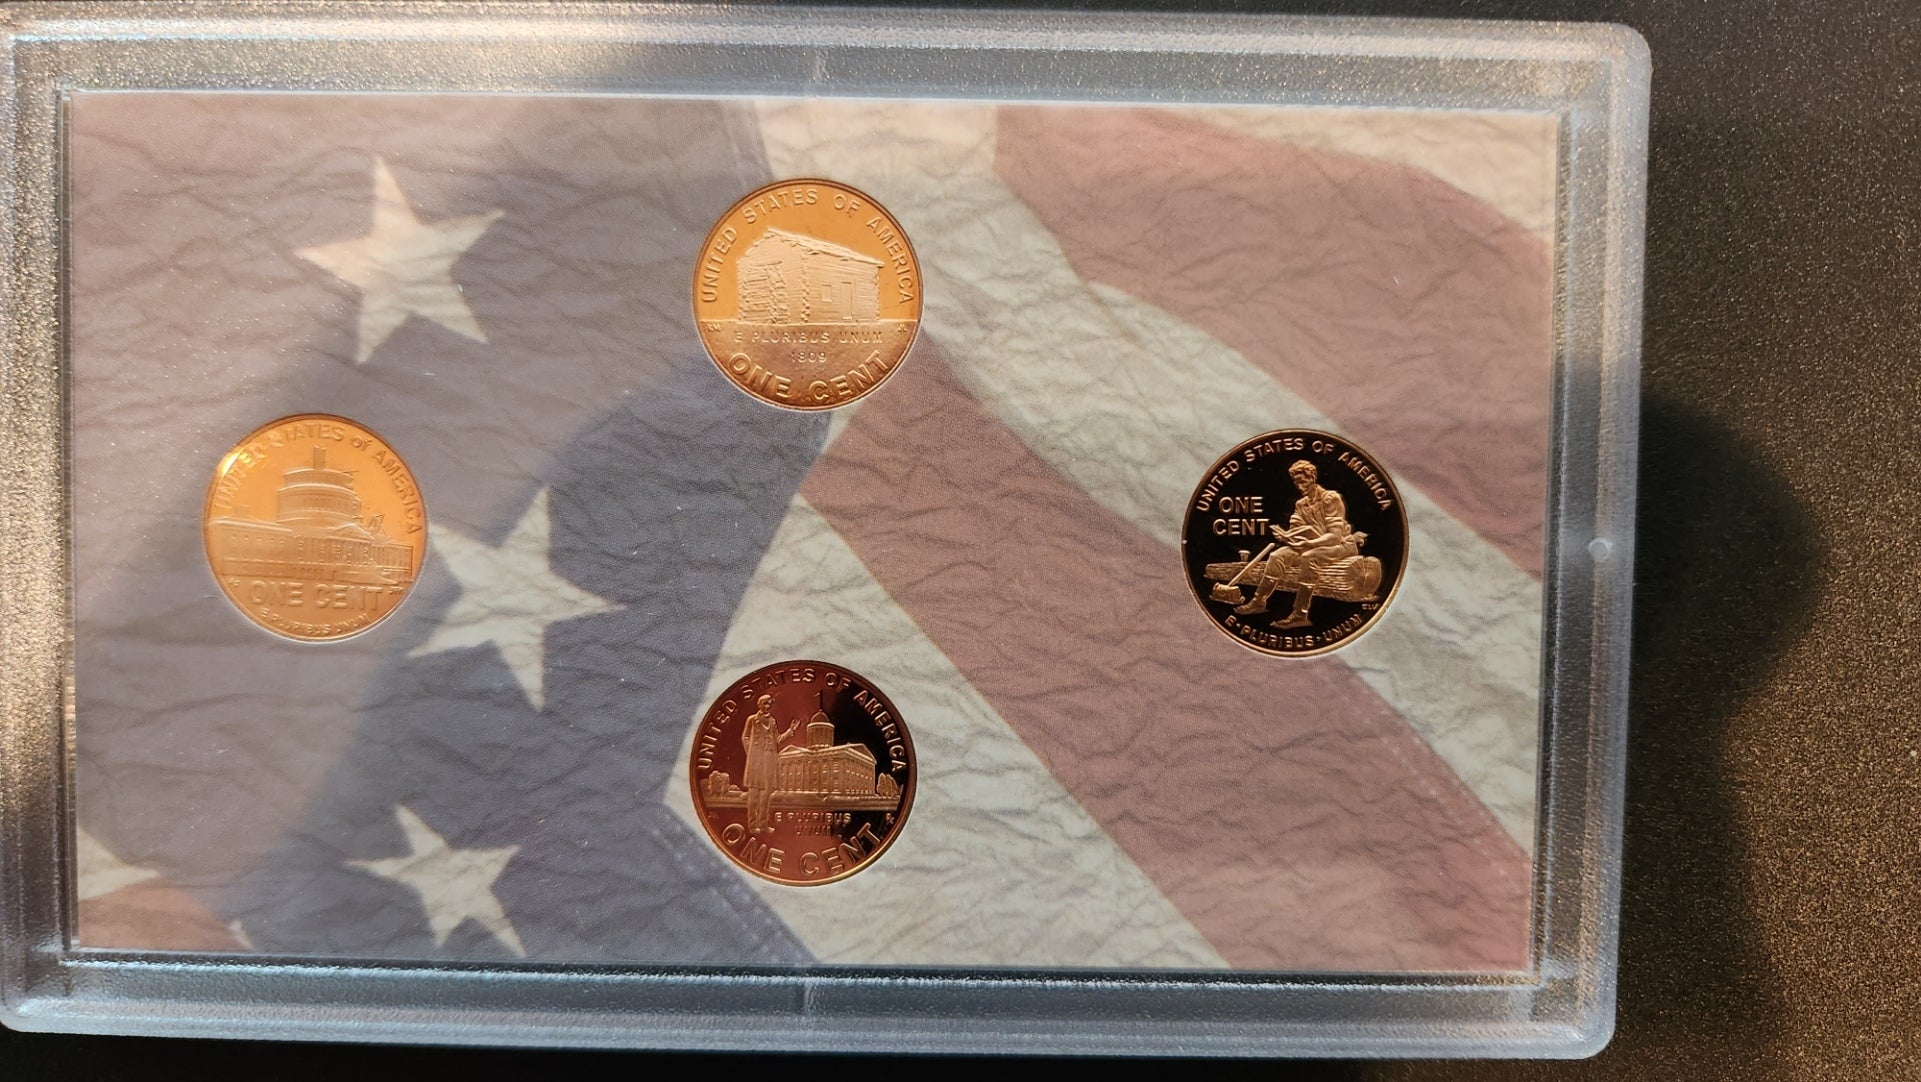 2009 United States Mint Silver Proof Set